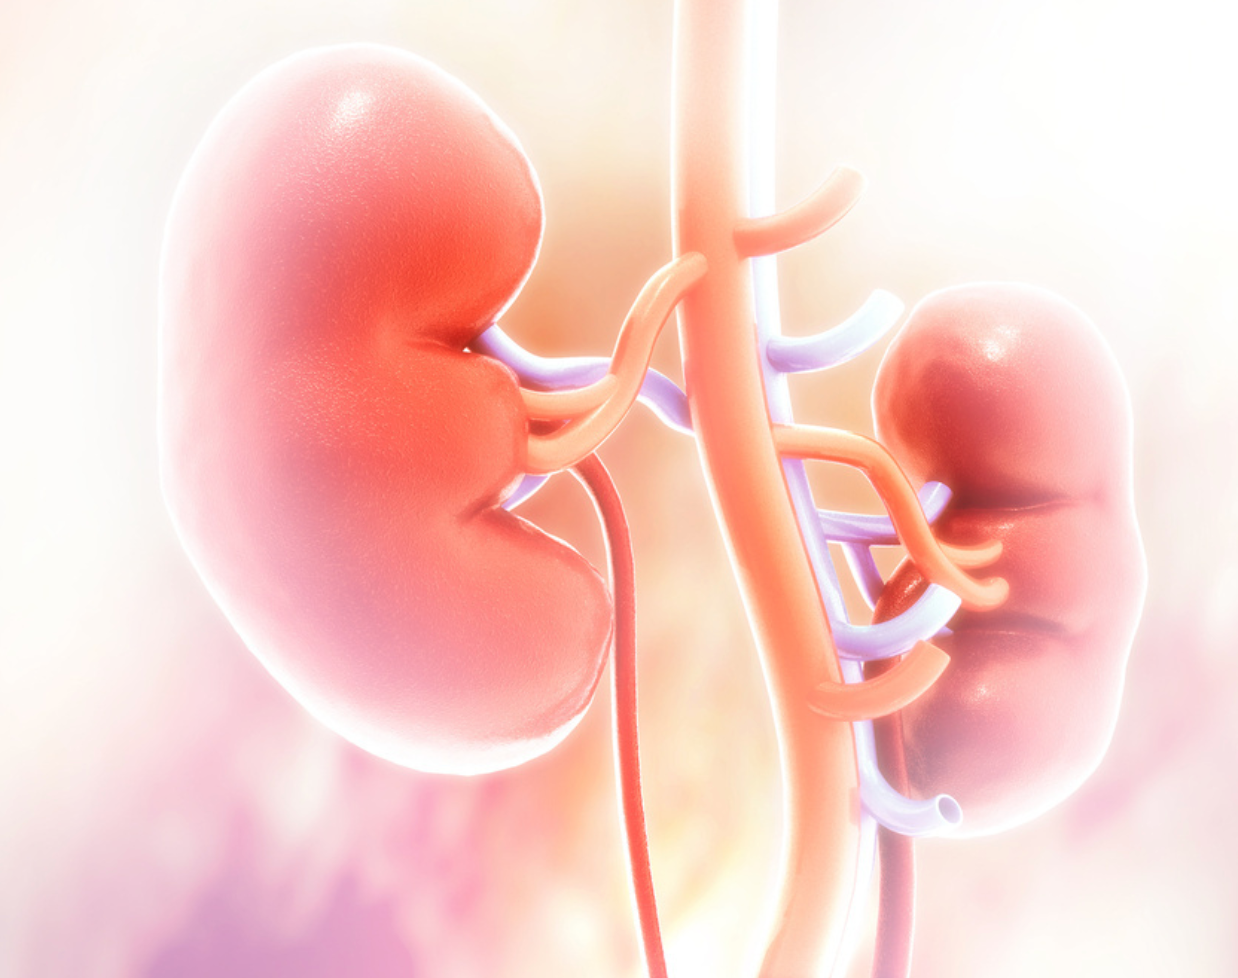 Iptacopan Demonstrates Reductions in Proteinuria for Patients With C3 Glomerulopathy